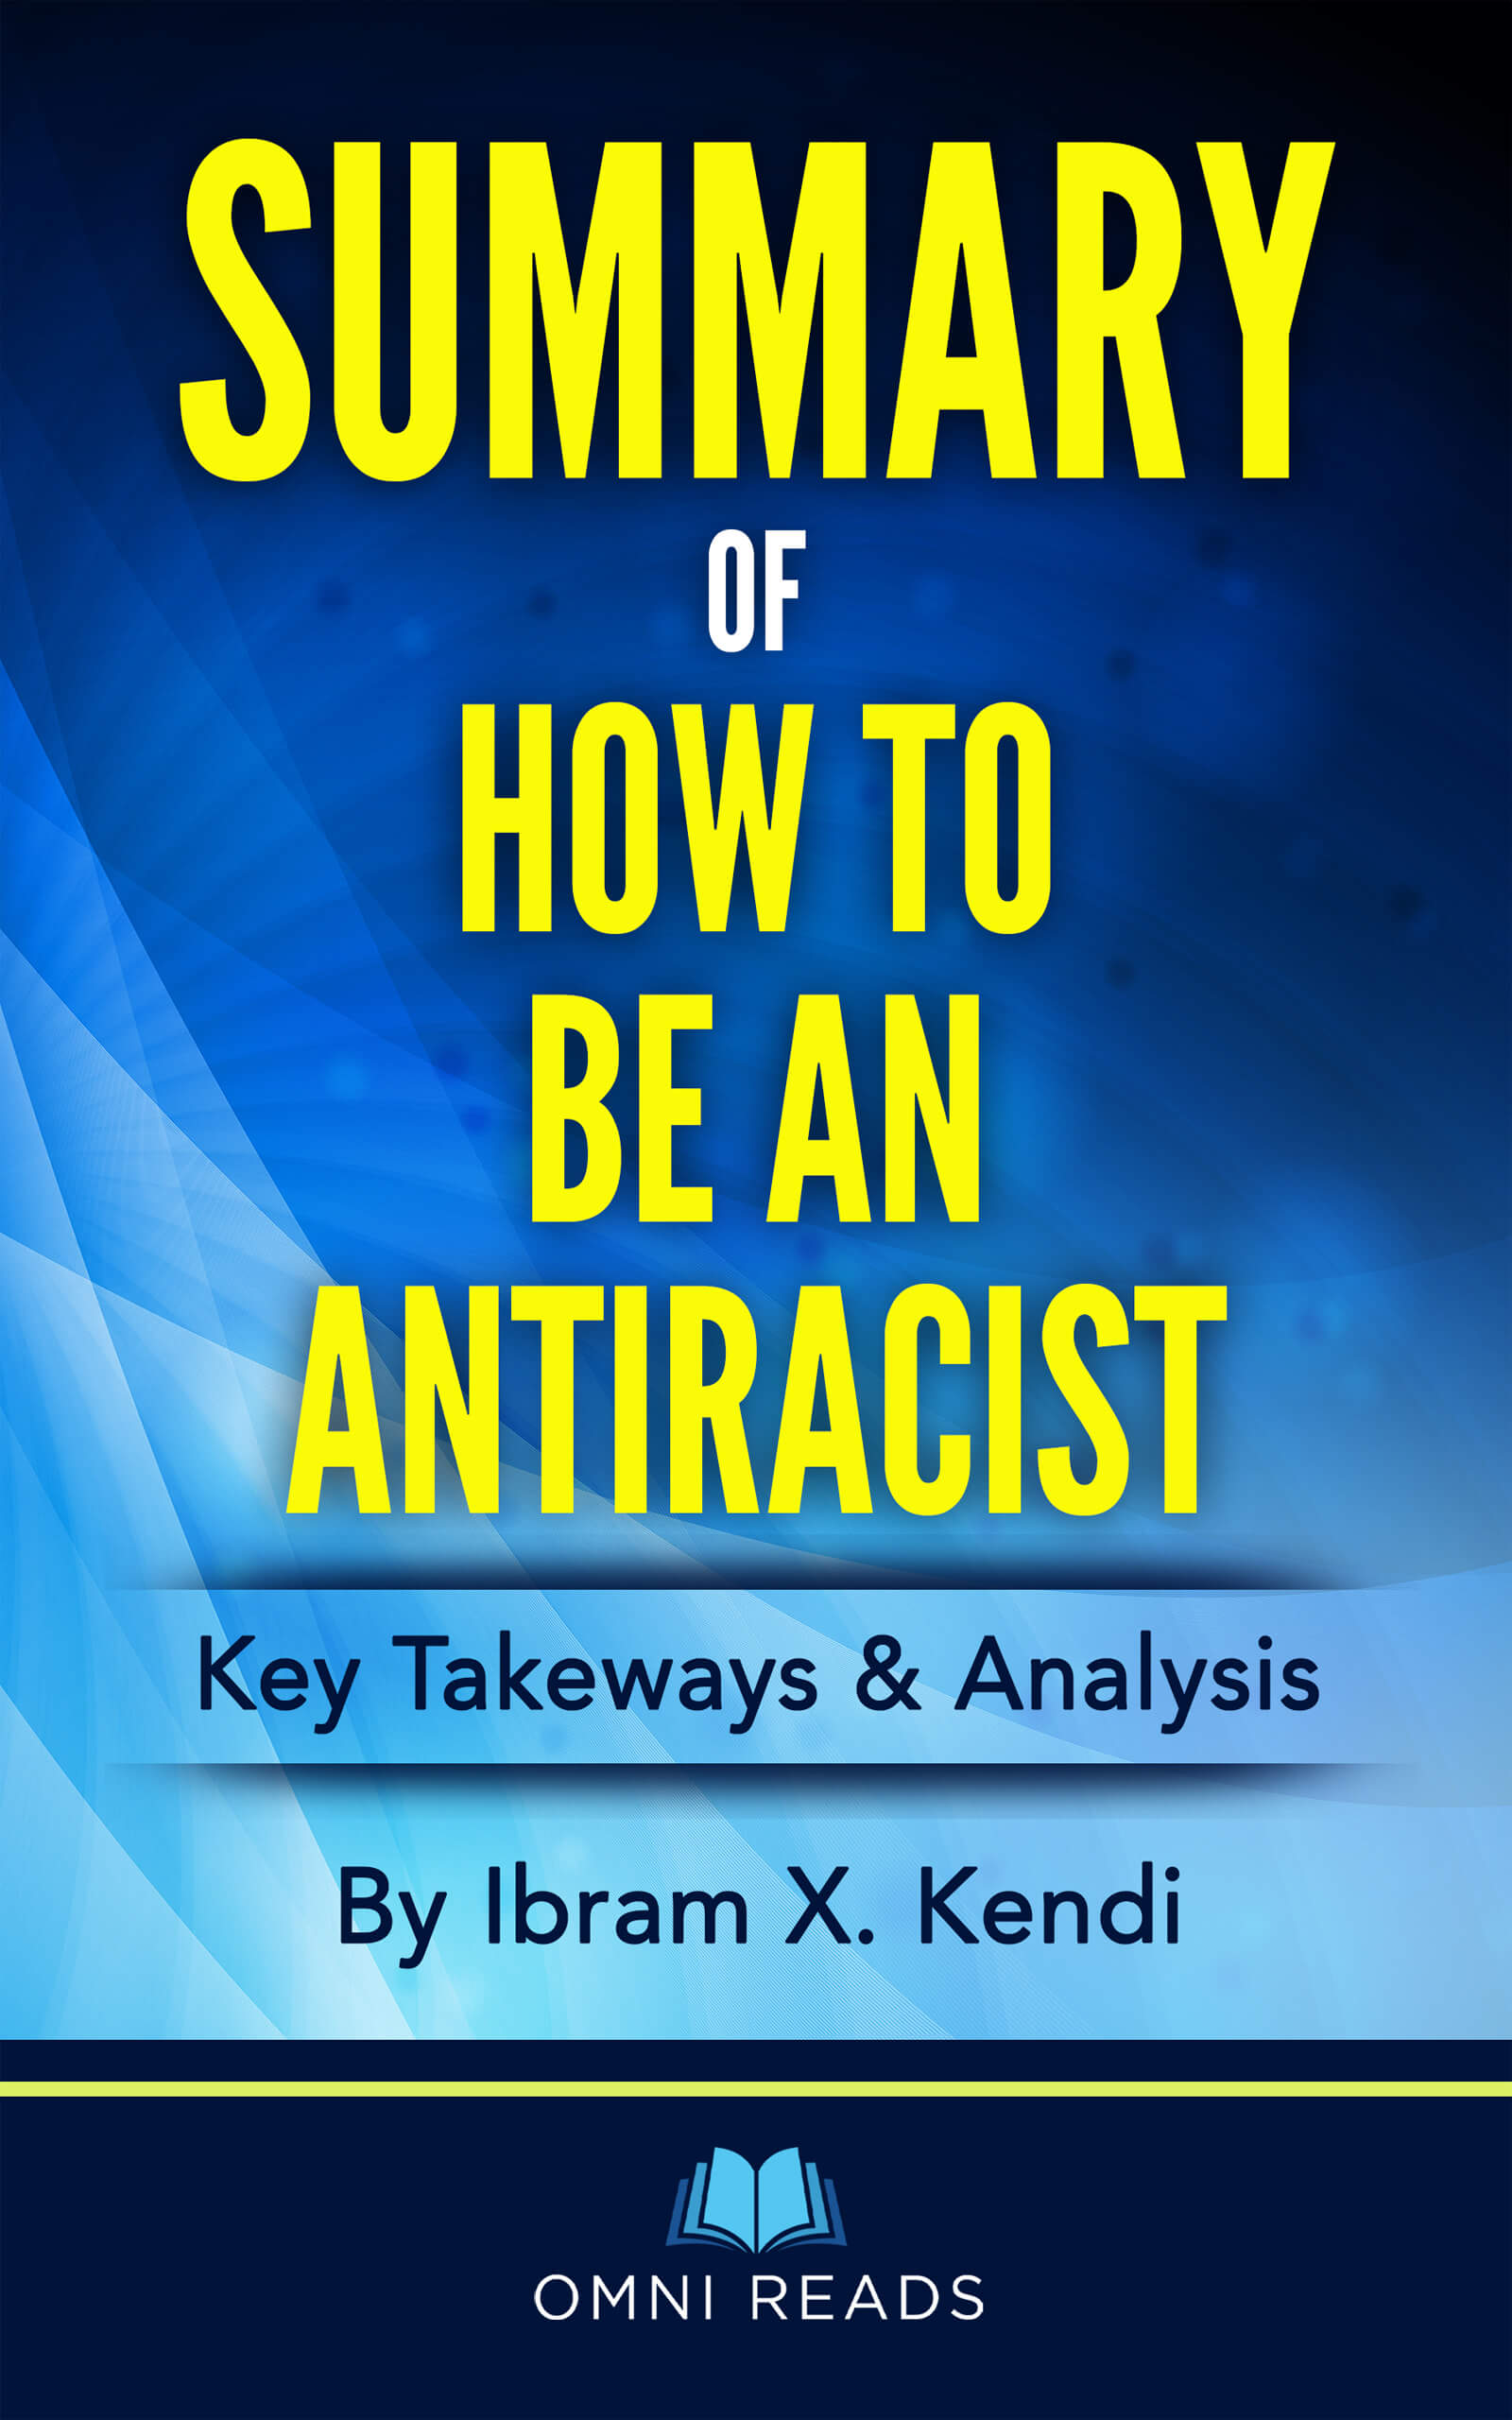 Summary Of how to be an antiracist by Alma Duncan